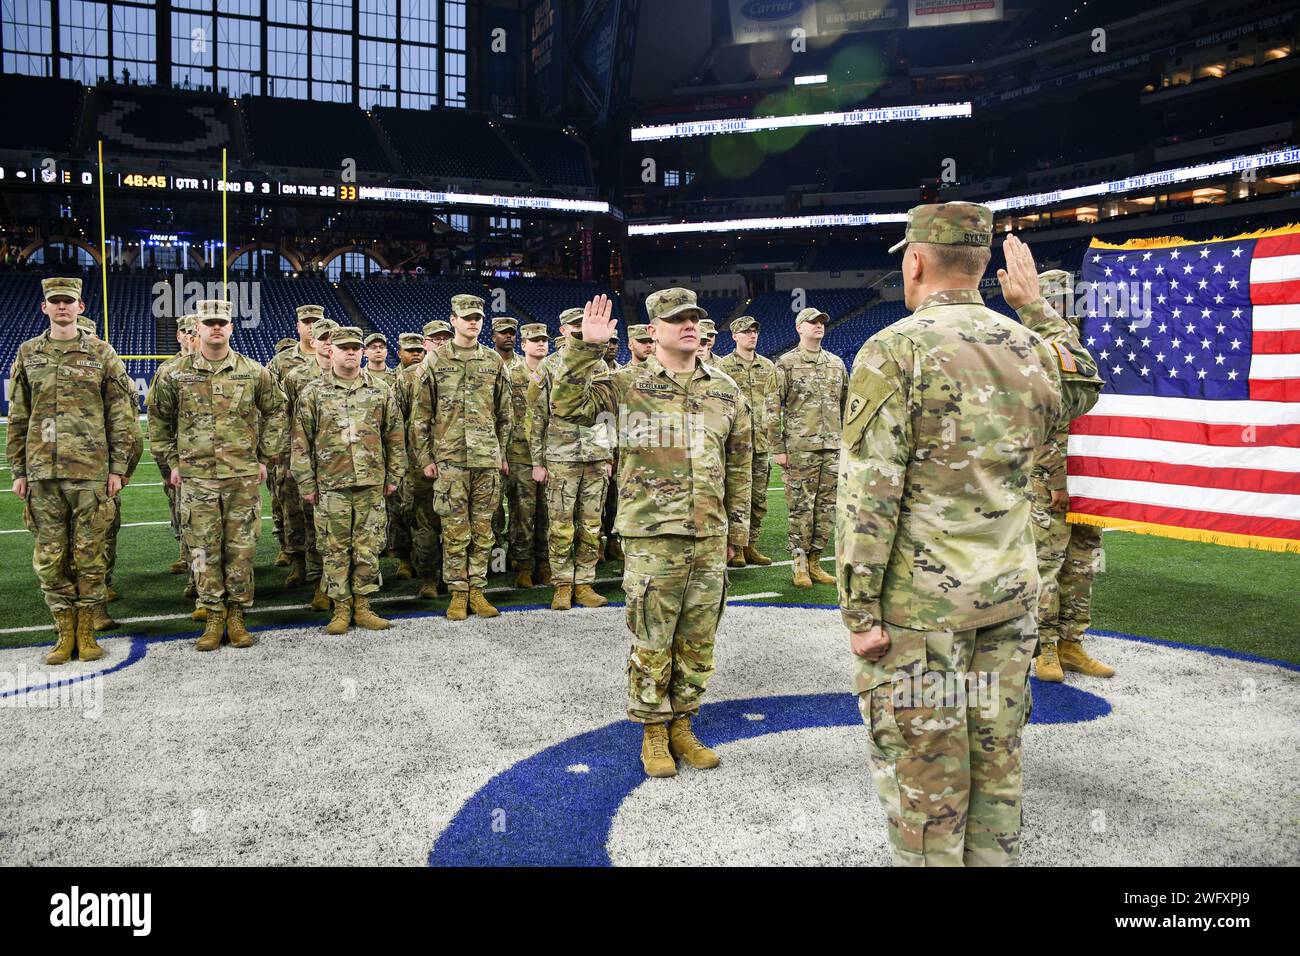 Indiana National Guard Capt. Aaron Sykora administers the oath of enlistment to U.S. Army Staff Sgt. Christopher Eckelkamp at Lucas Oil Stadium in Indianapolis, Jan. 6, 2024. The oath of enlistment is a military oath made by all members of the U.S. armed forces who enlist to serve. (Indiana National Guard Stock Photo